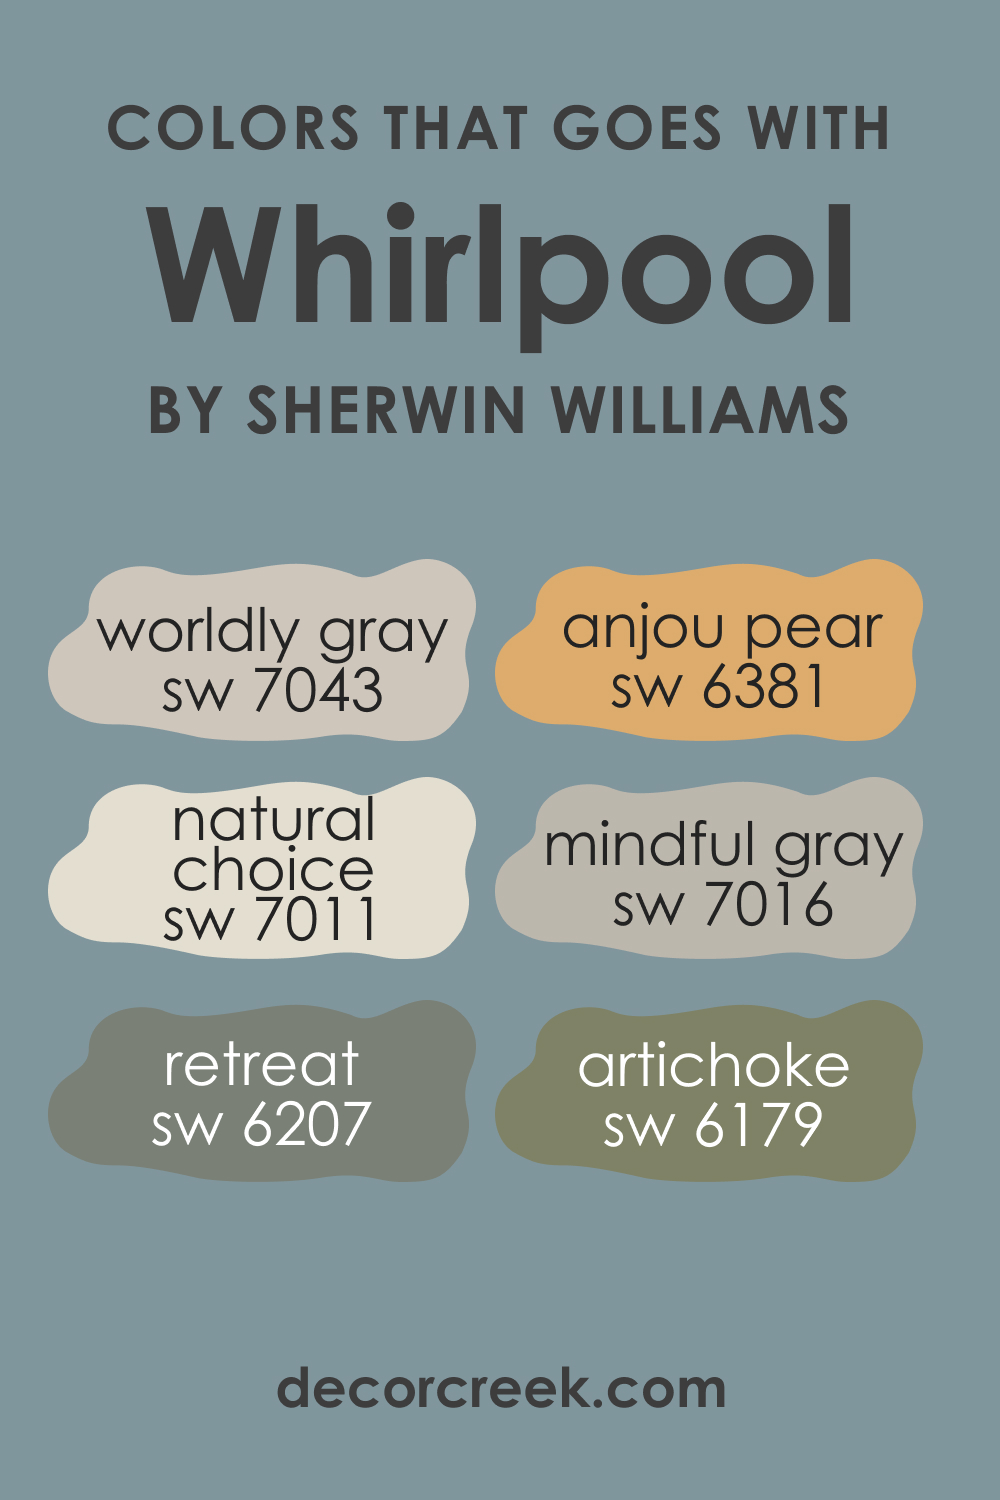 Whirlpool SW 9135 Paint Color by Sherwin Williams - DecorCreek